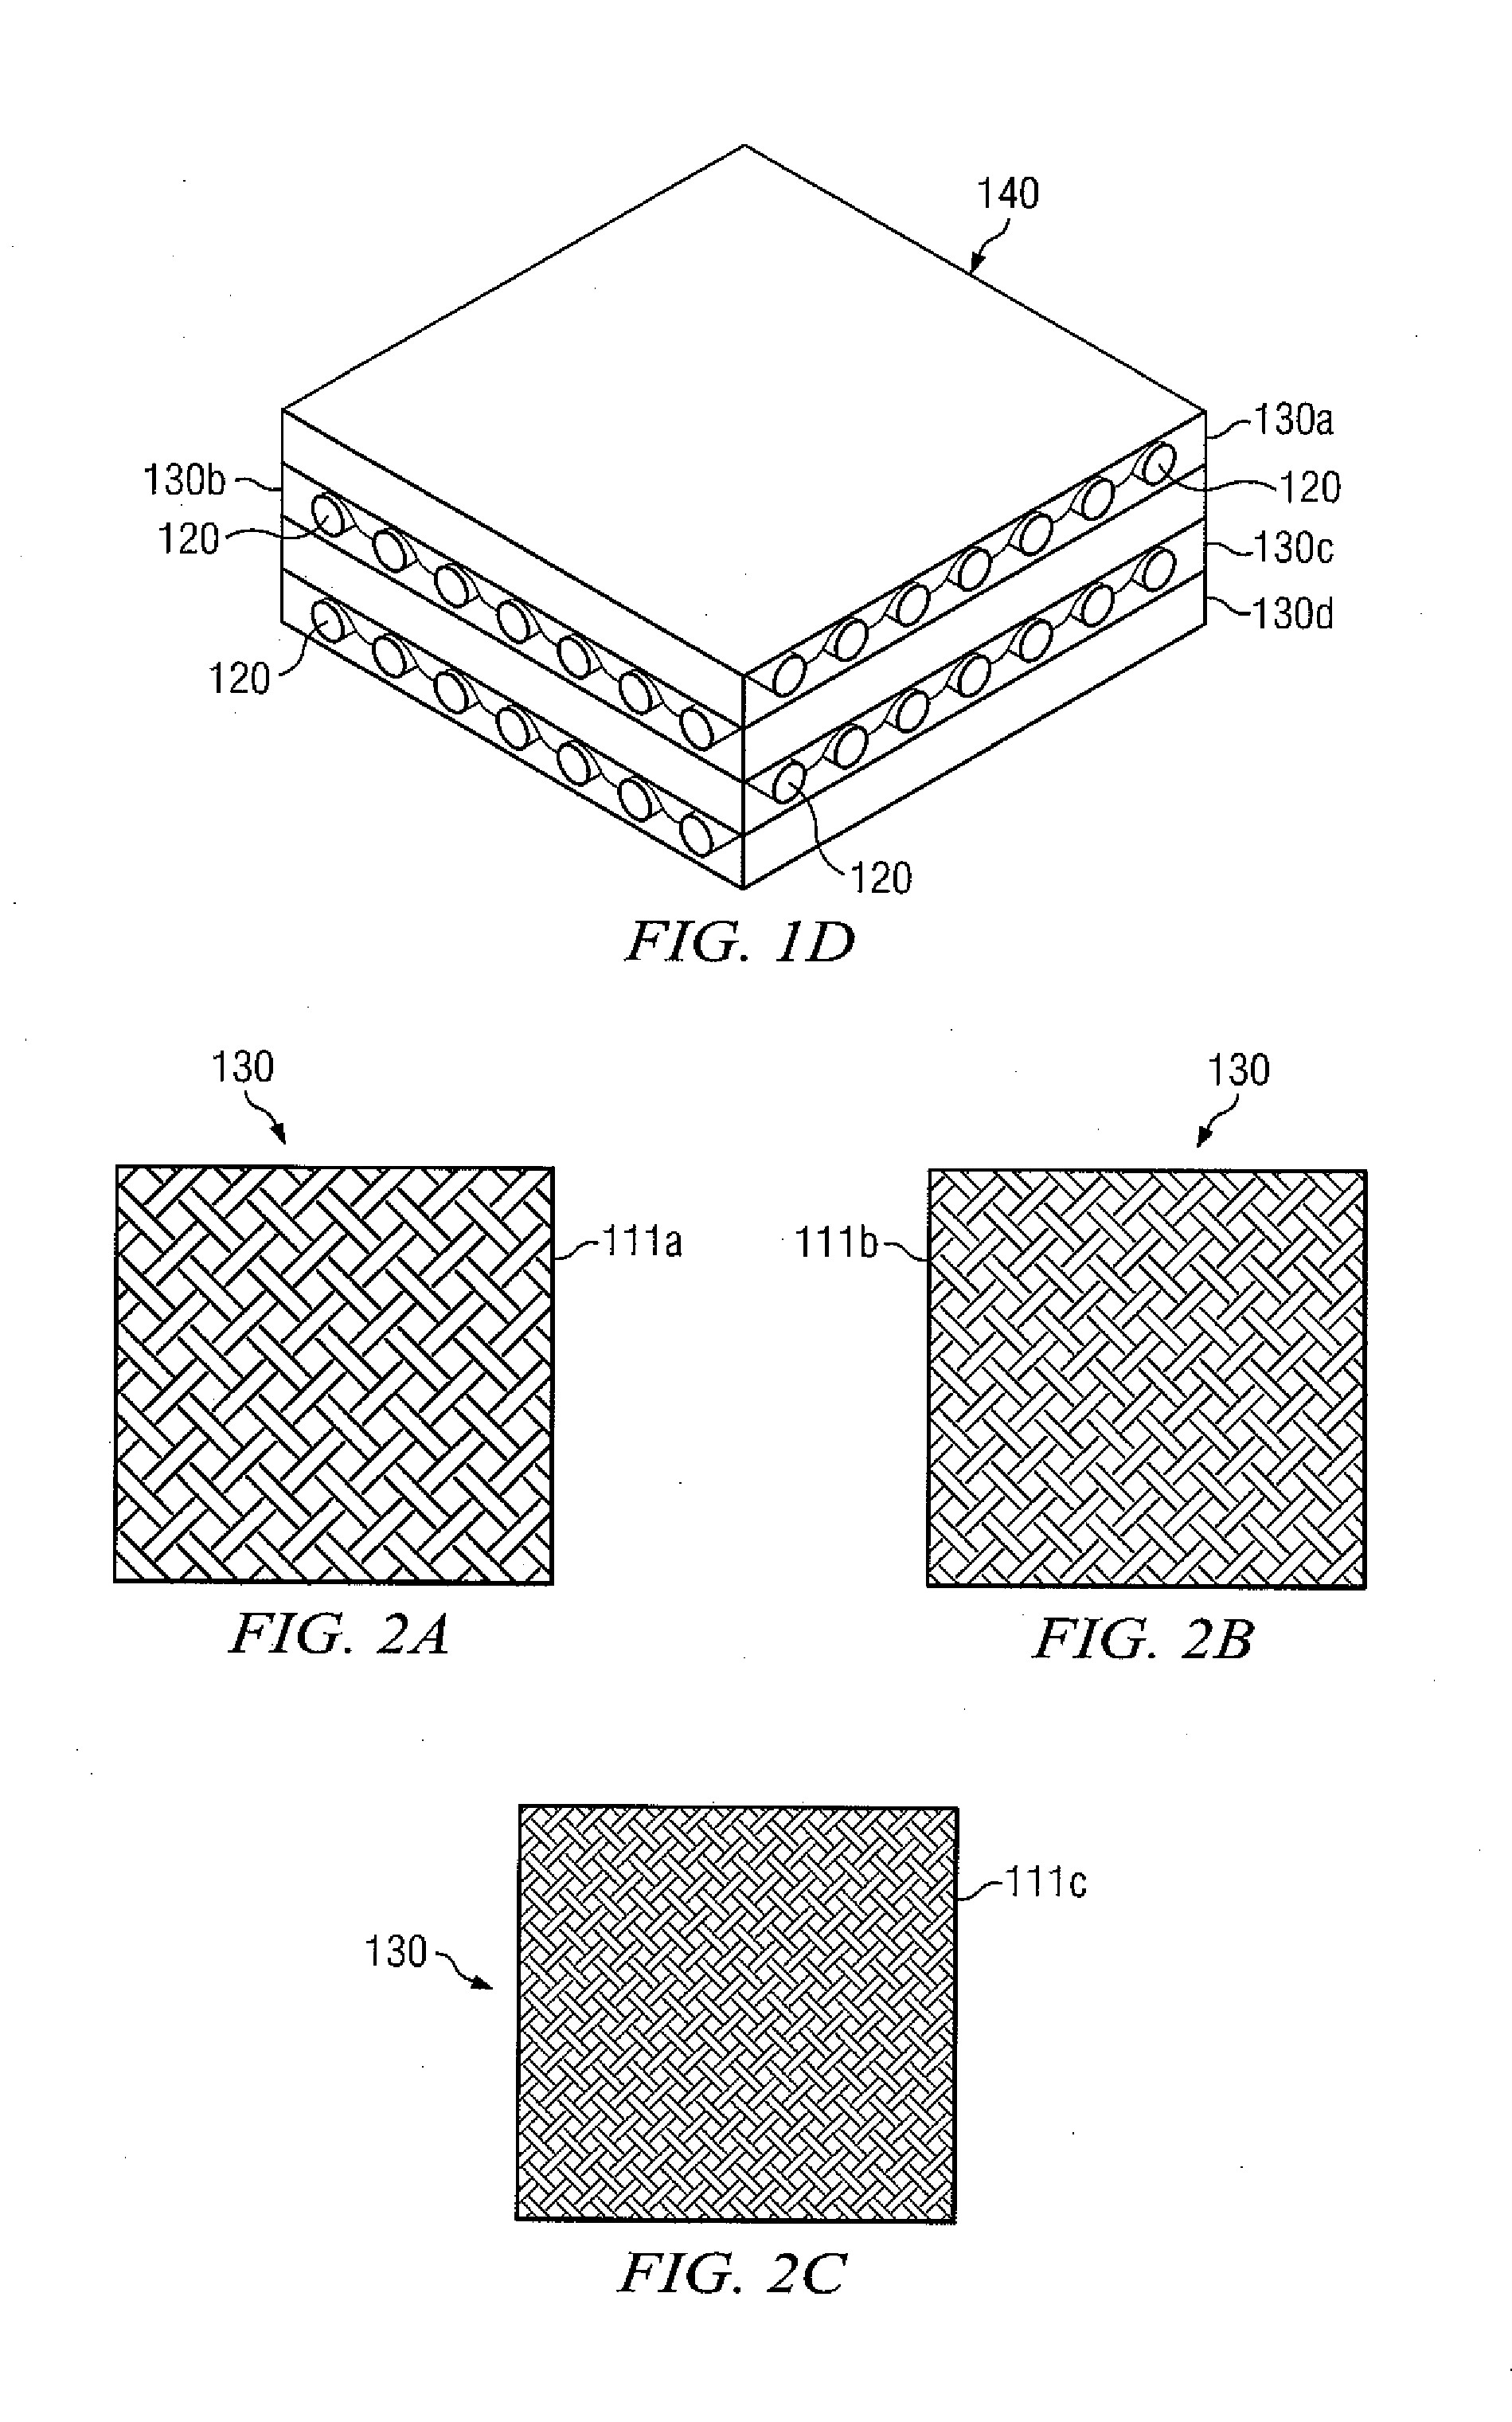 Method of Layering Composite Sheets to Improve Armor Capabilities